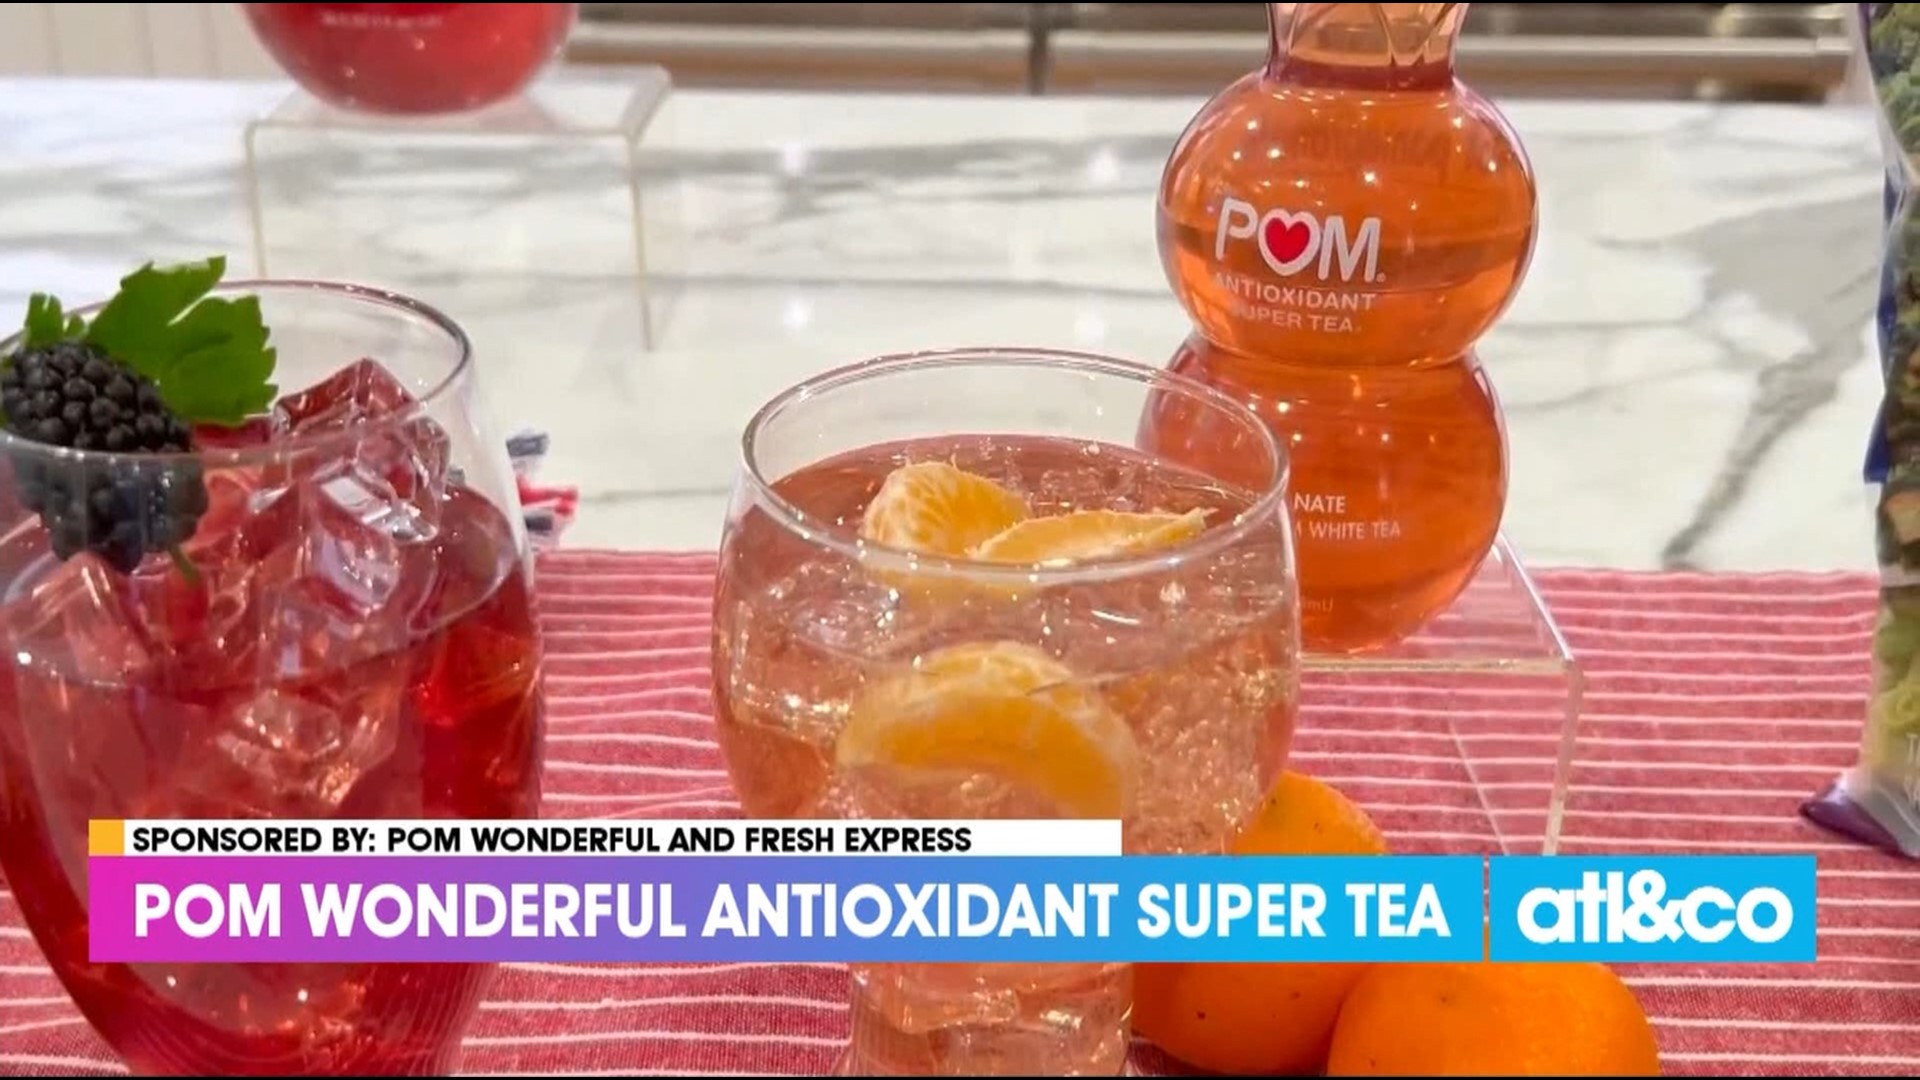 Lifestyle editor Joann Butler shares sweet summer sips and essentials.